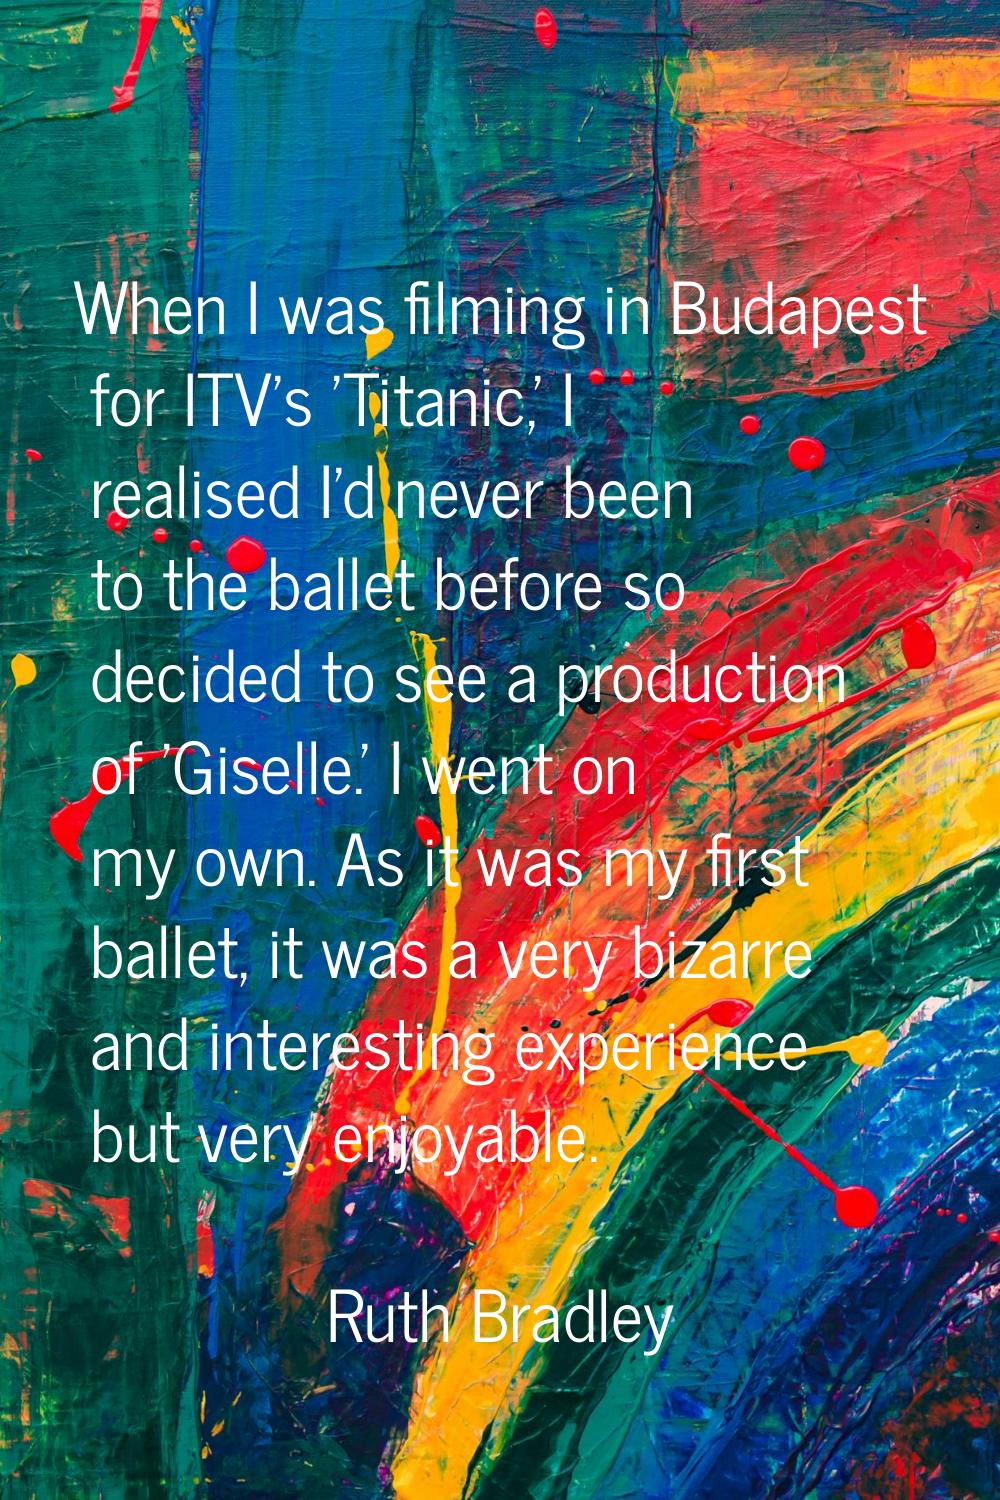 When I was filming in Budapest for ITV's 'Titanic,' I realised I'd never been to the ballet before 